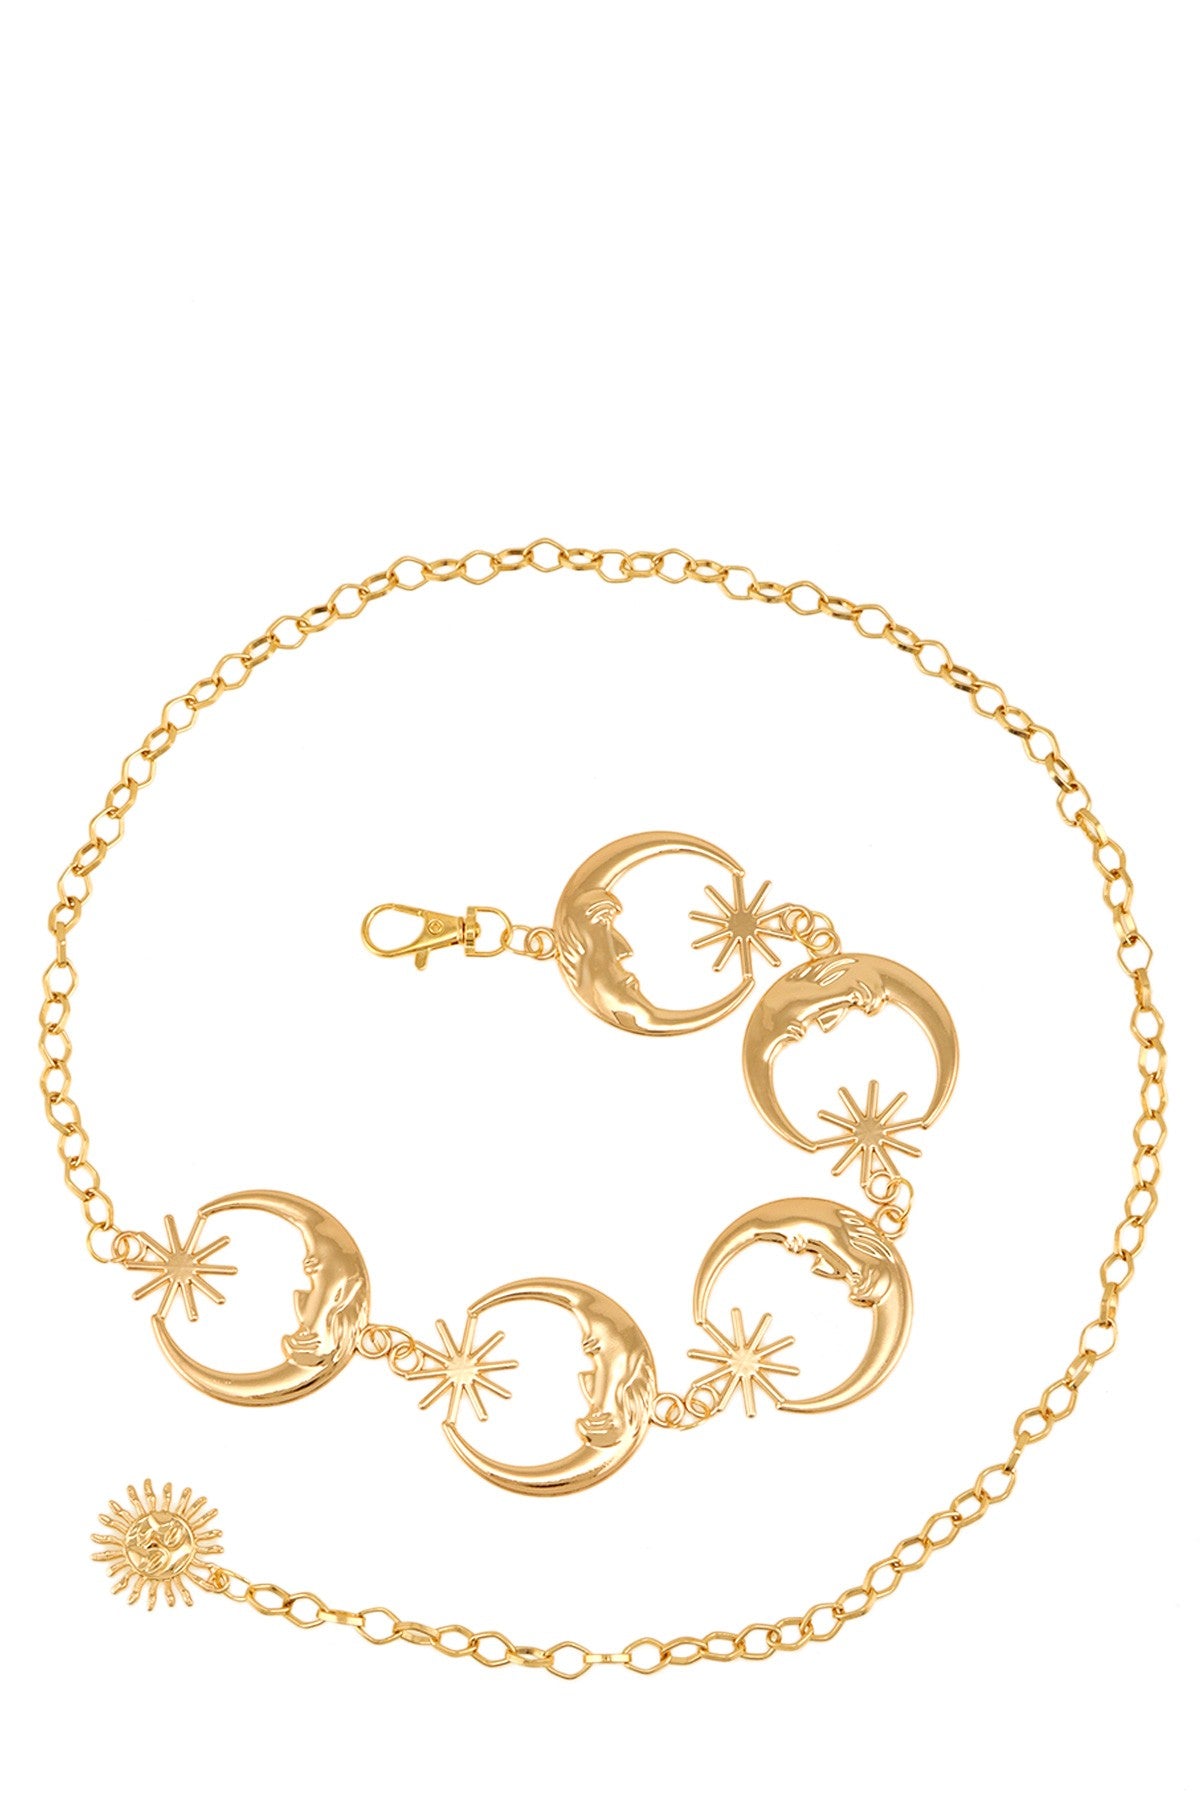 Gold metal crescent moon and starburst chain belt. Shown flat.